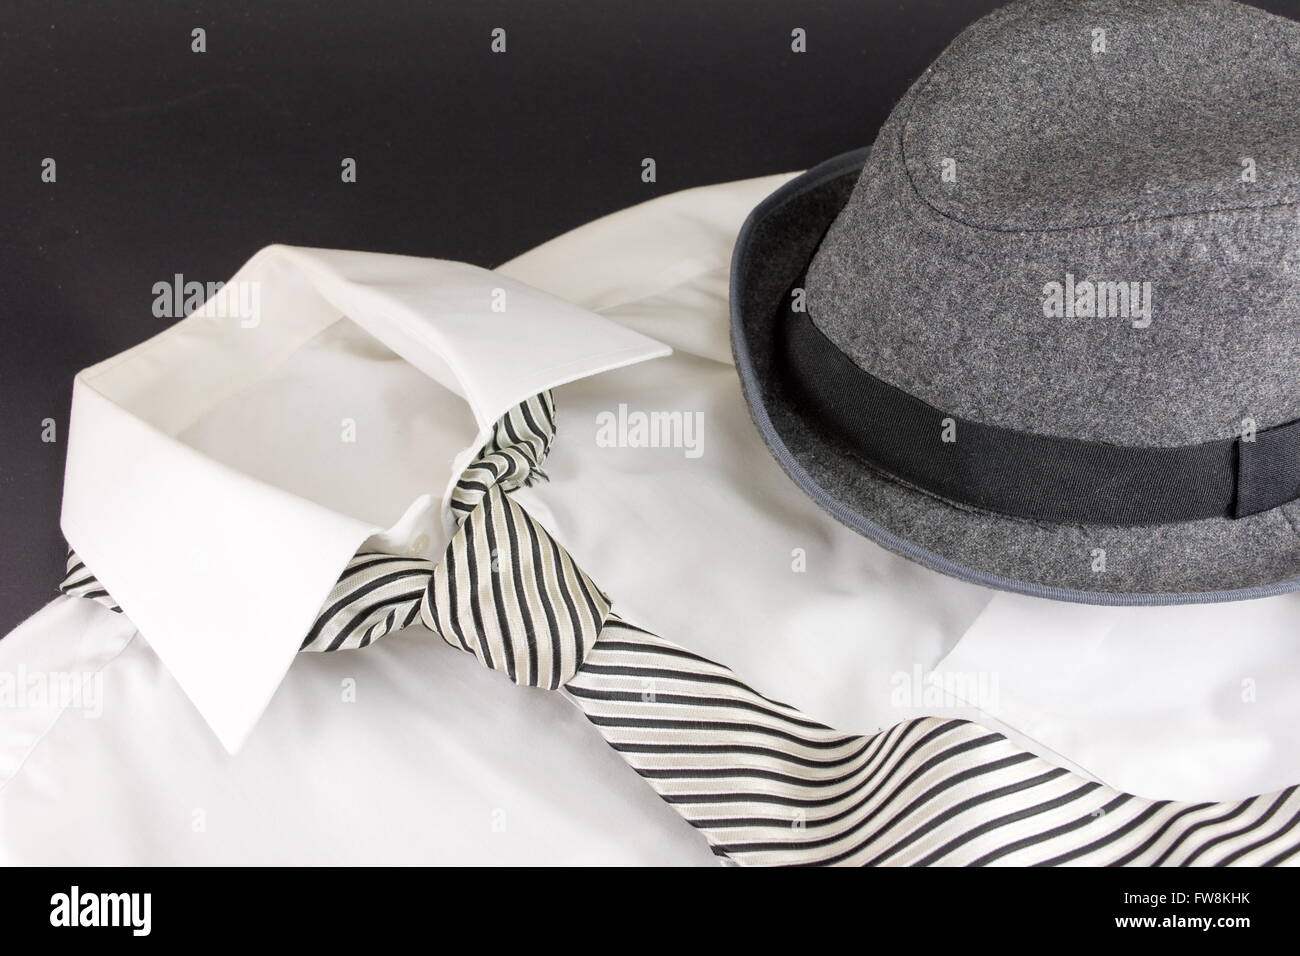 black hat, white tie, and stipped shirt Stock Photo